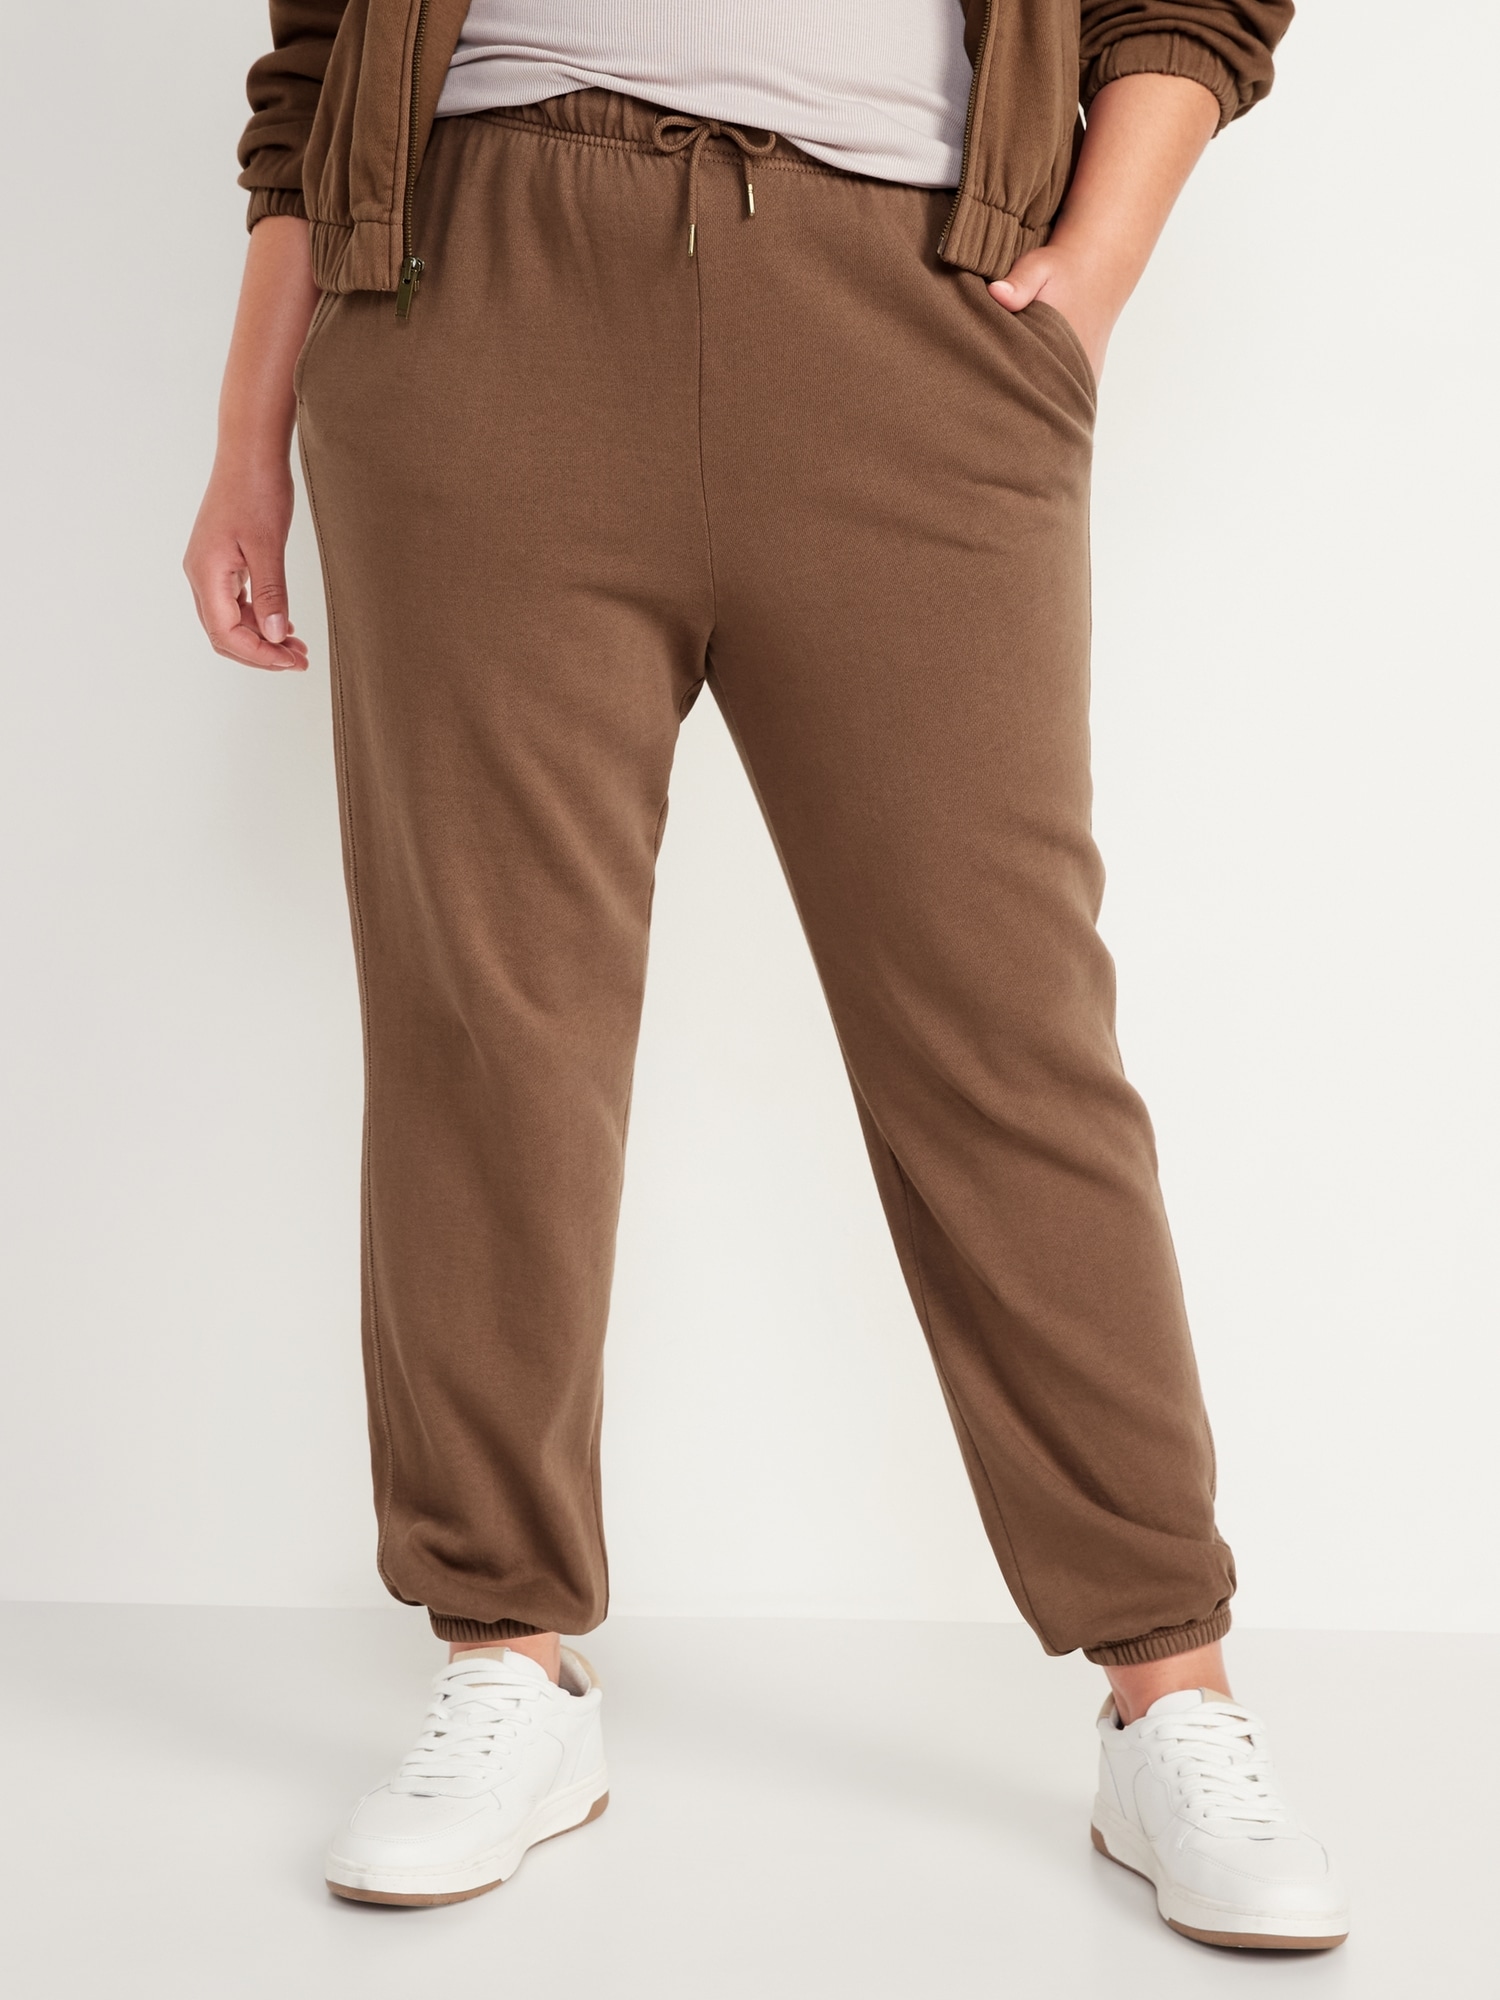 Old Navy Extra High-Waisted Specially-Dyed Fleece Classic Sweatpants for Women